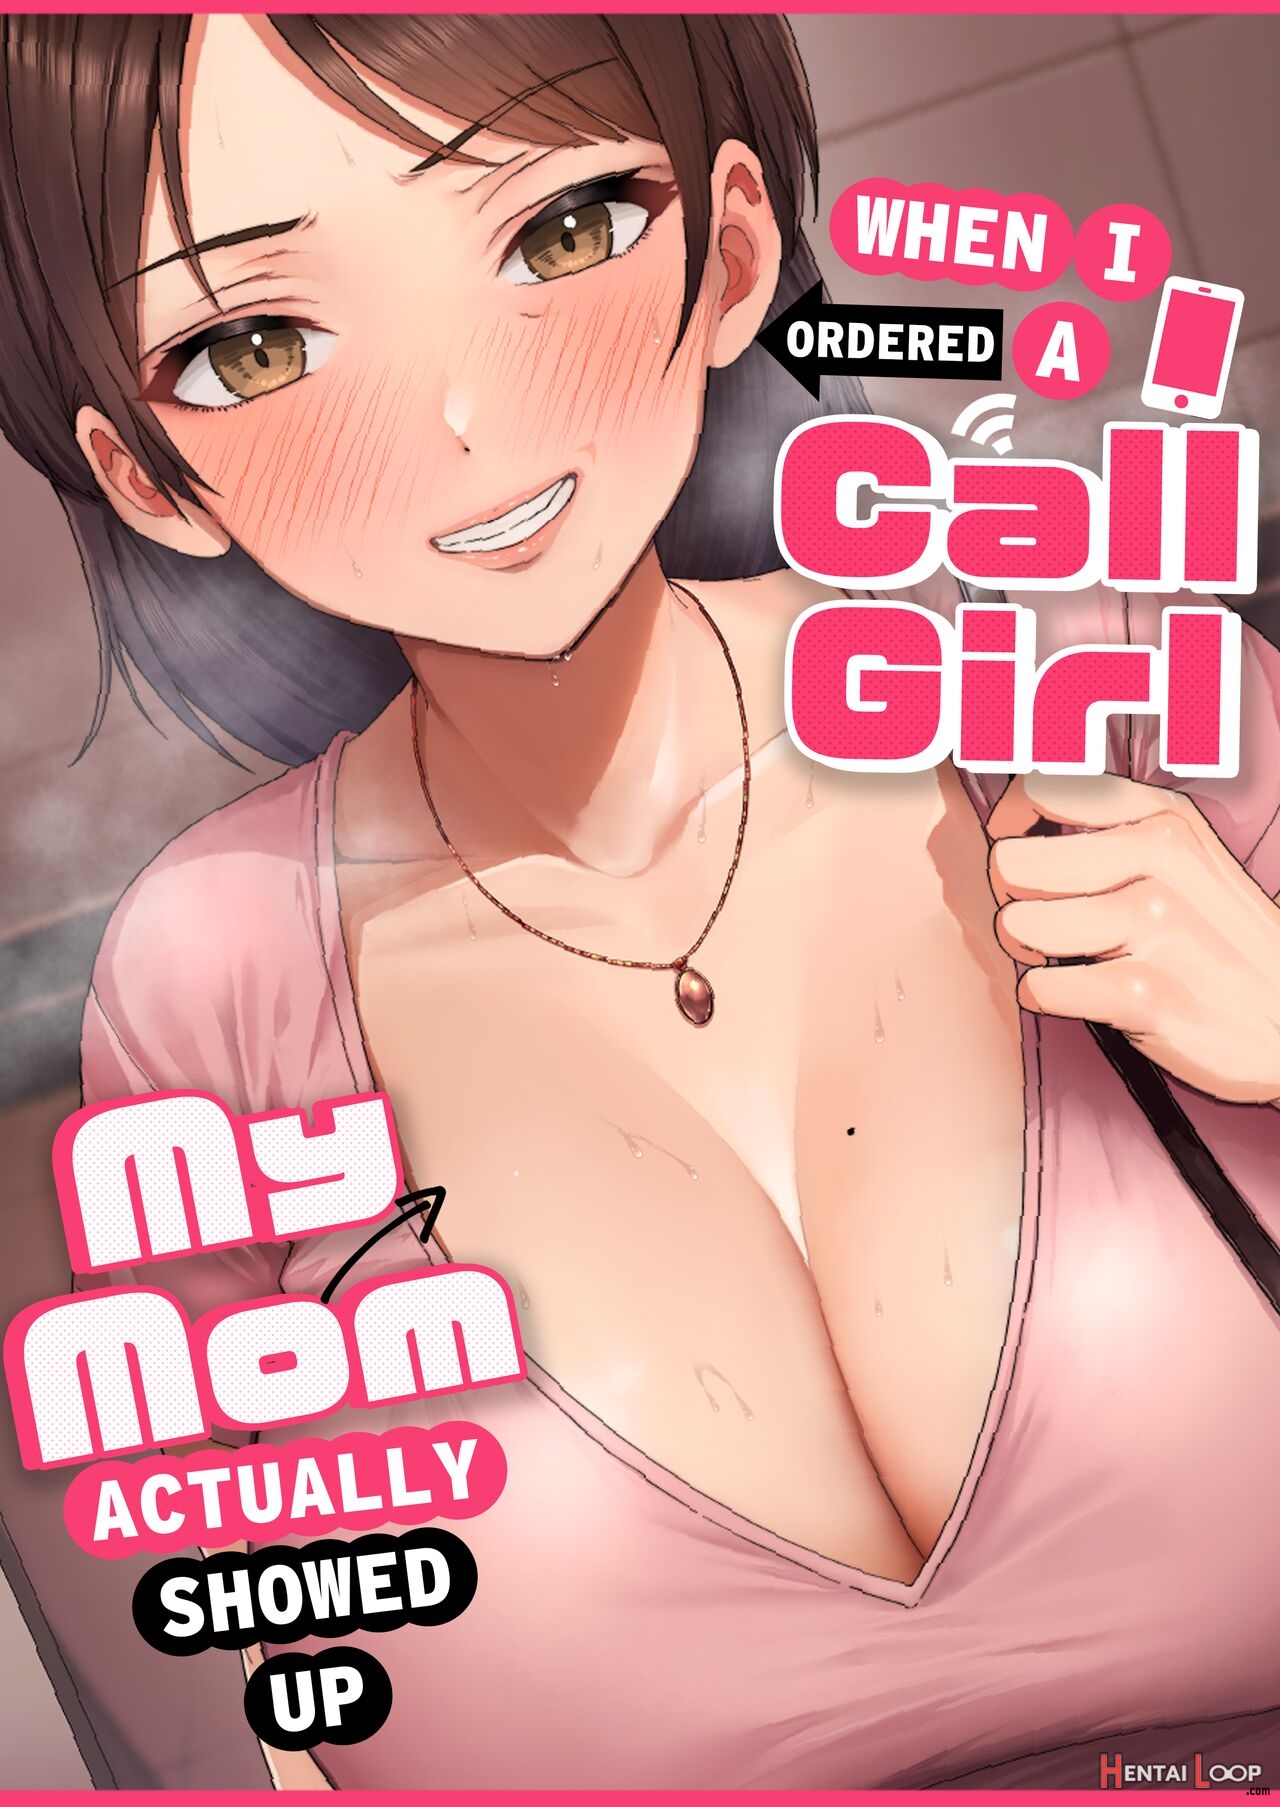 When I Ordered A Call Girl My Mom Actually Showed Up. page 1